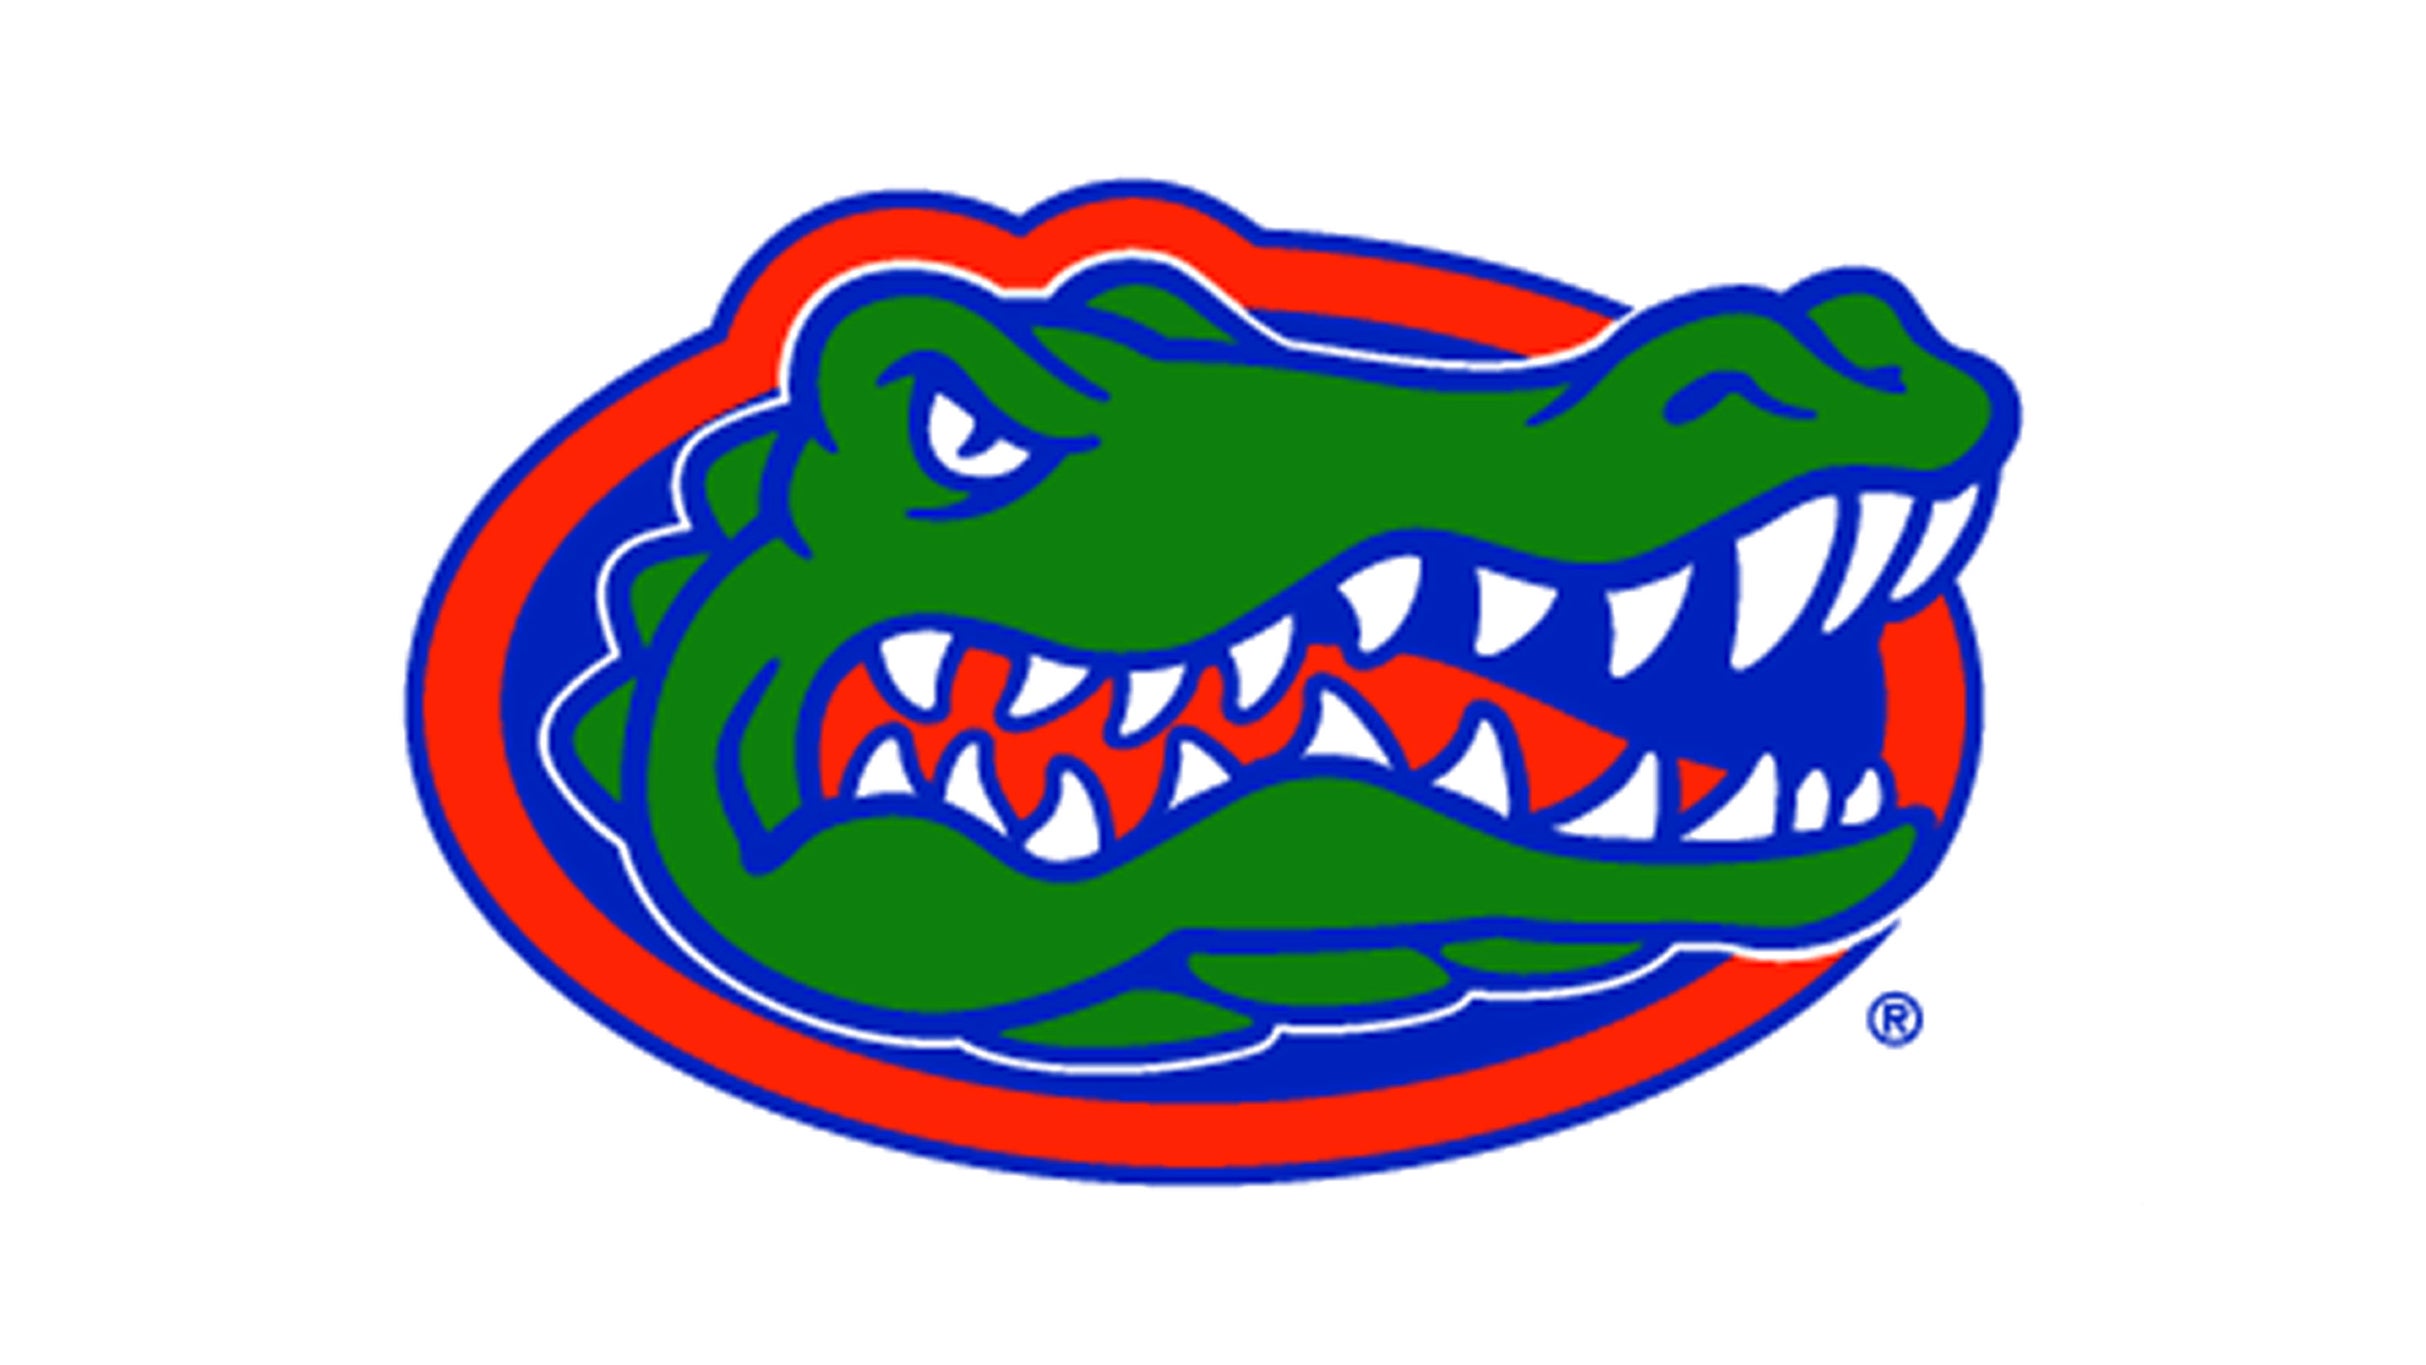 Florida Gators Football vs. Texas A&M Aggies Football in Gainesville promo photo for Official Platinum Onsale presale offer code